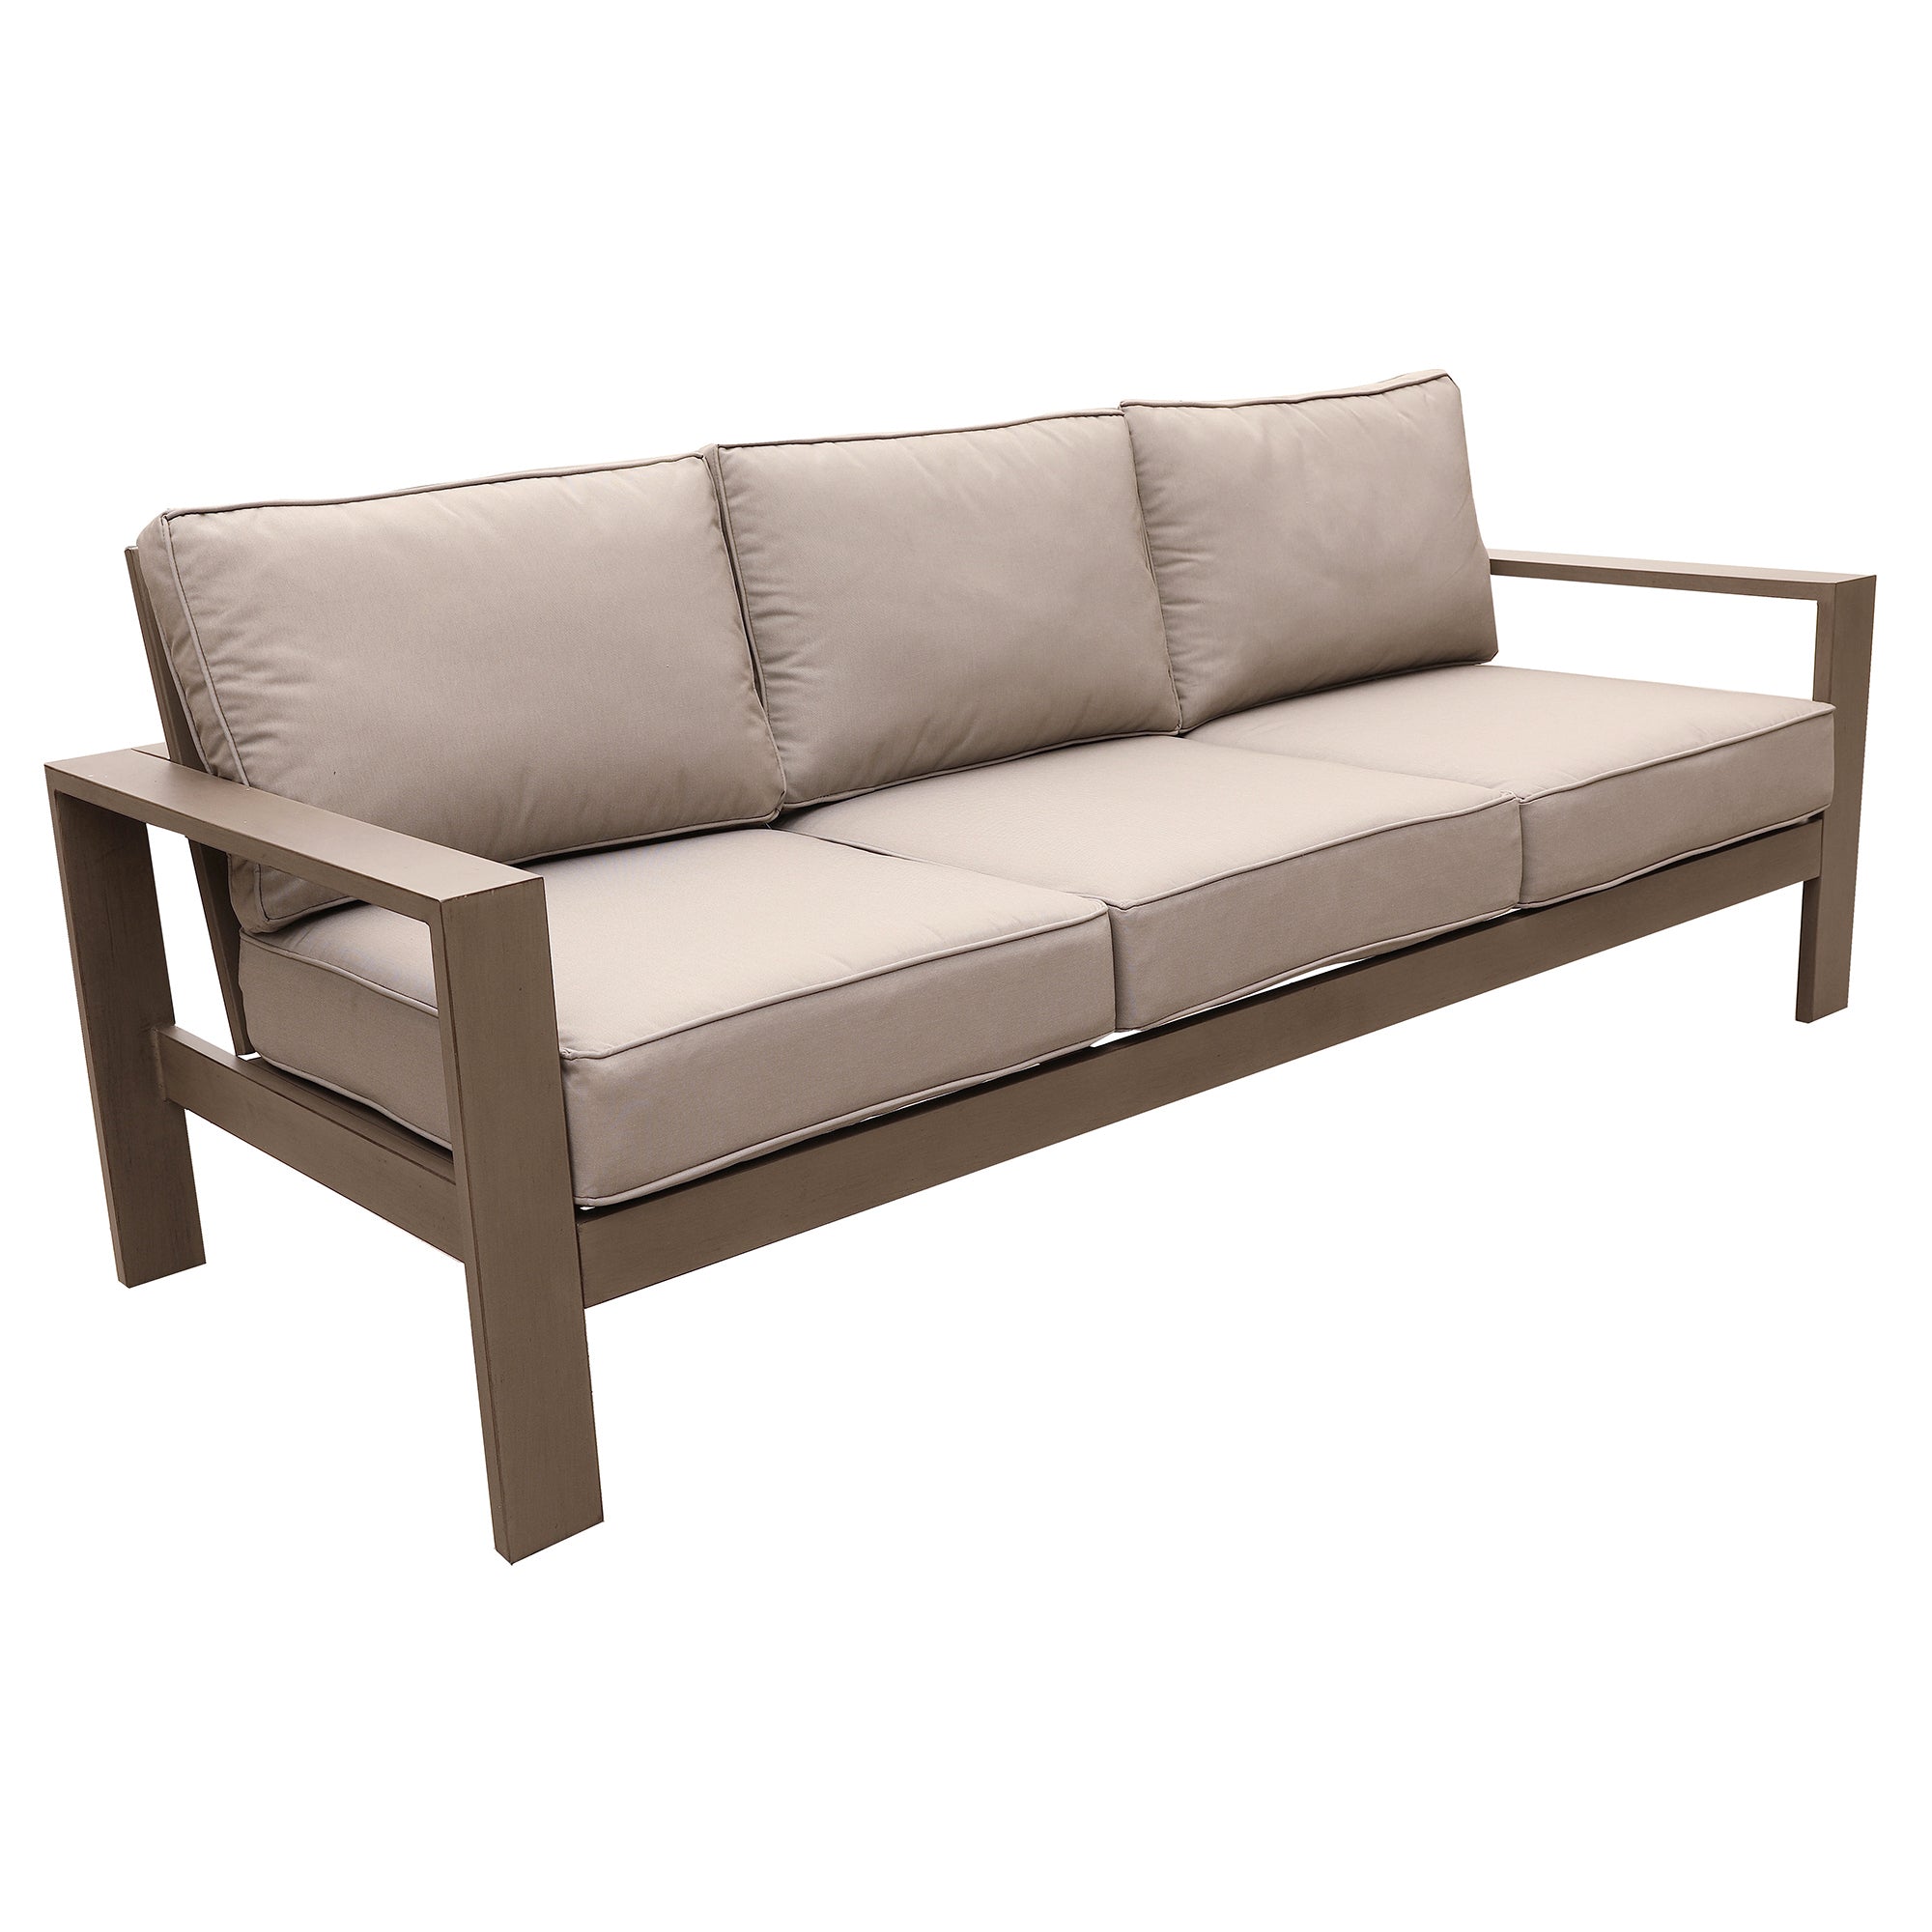 6 Piece Sofa Seating Group with Cushions, Wood Grained pewter-polyester-aluminum